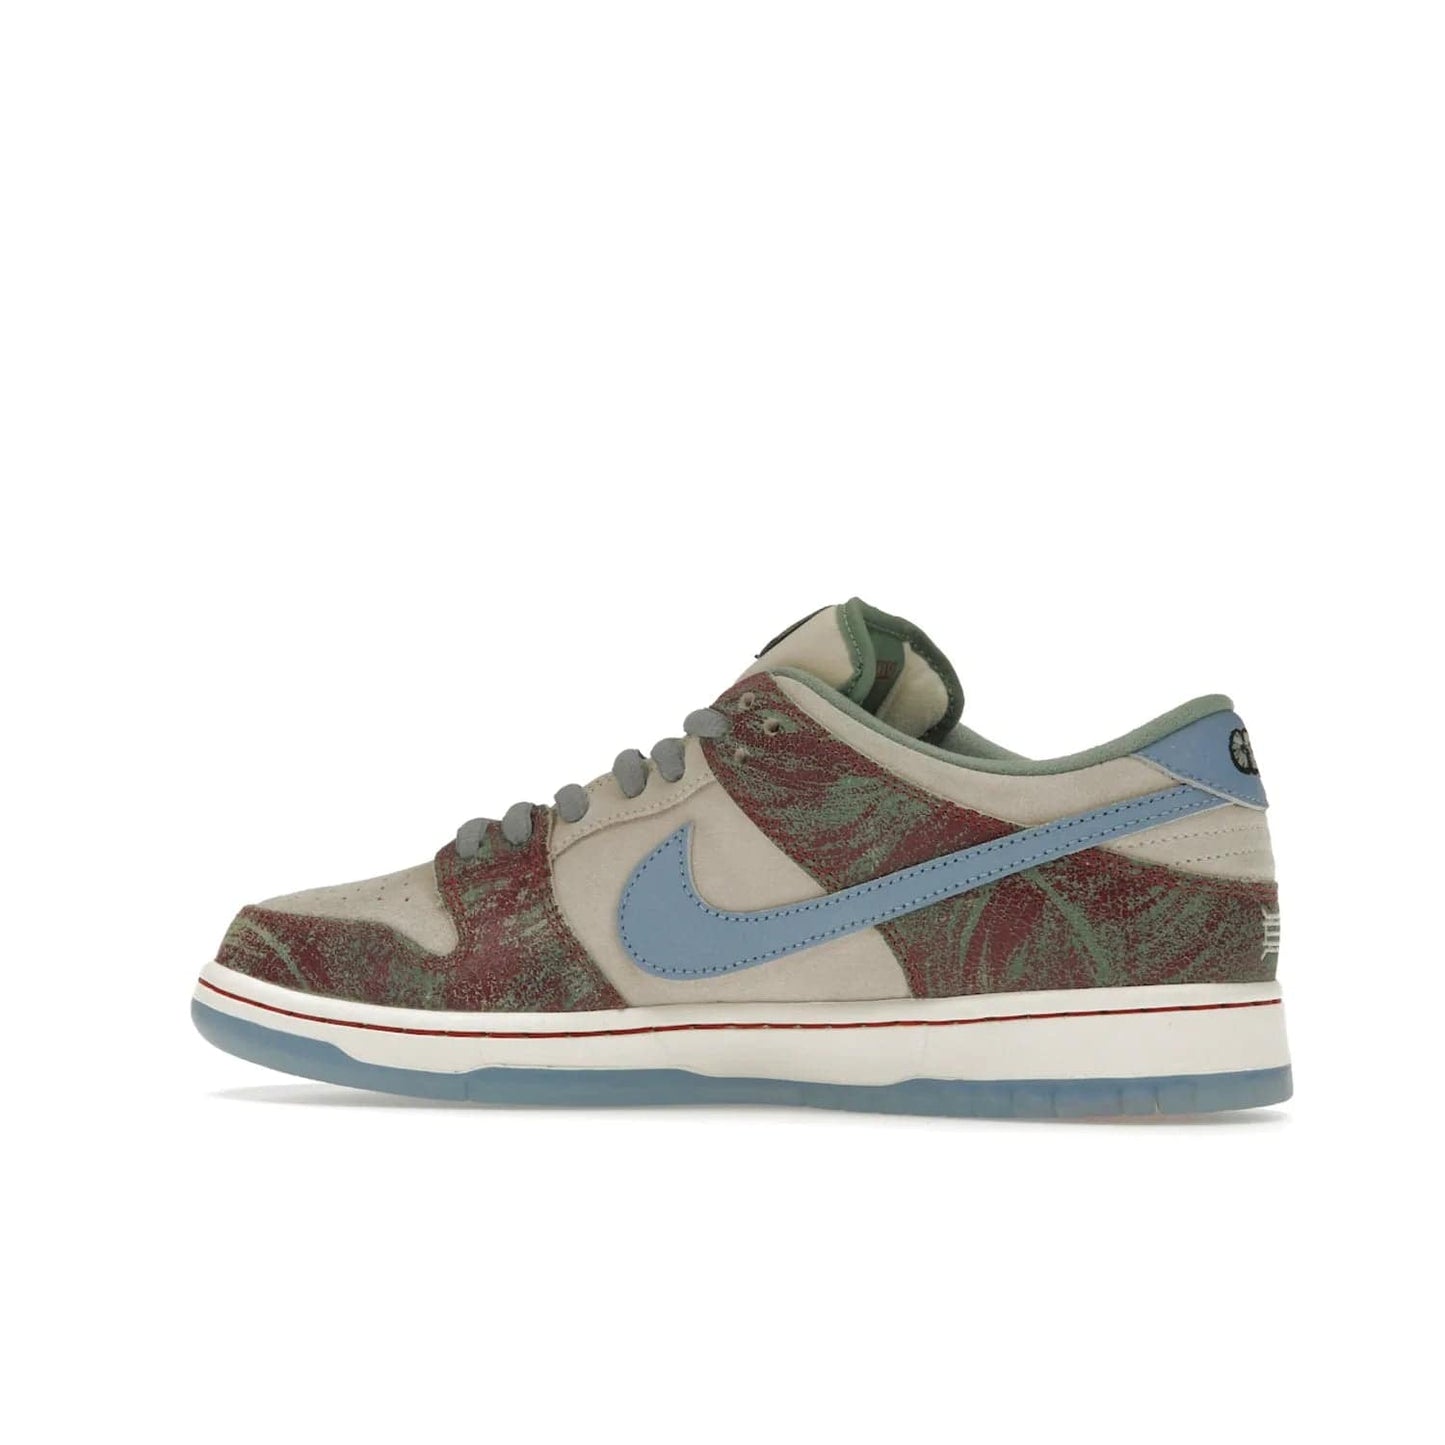 Nike SB Dunk Low Crenshaw Skate Club - Image 21 - Only at www.BallersClubKickz.com - Introducing the Nike SB Dunk Low Crenshaw Skate Club! Classic skate shoes with Sail and Light Blue upper, Cedar accents, padded collars and superior grip for comfortable, stable performance and style. Ideal for any skate session.